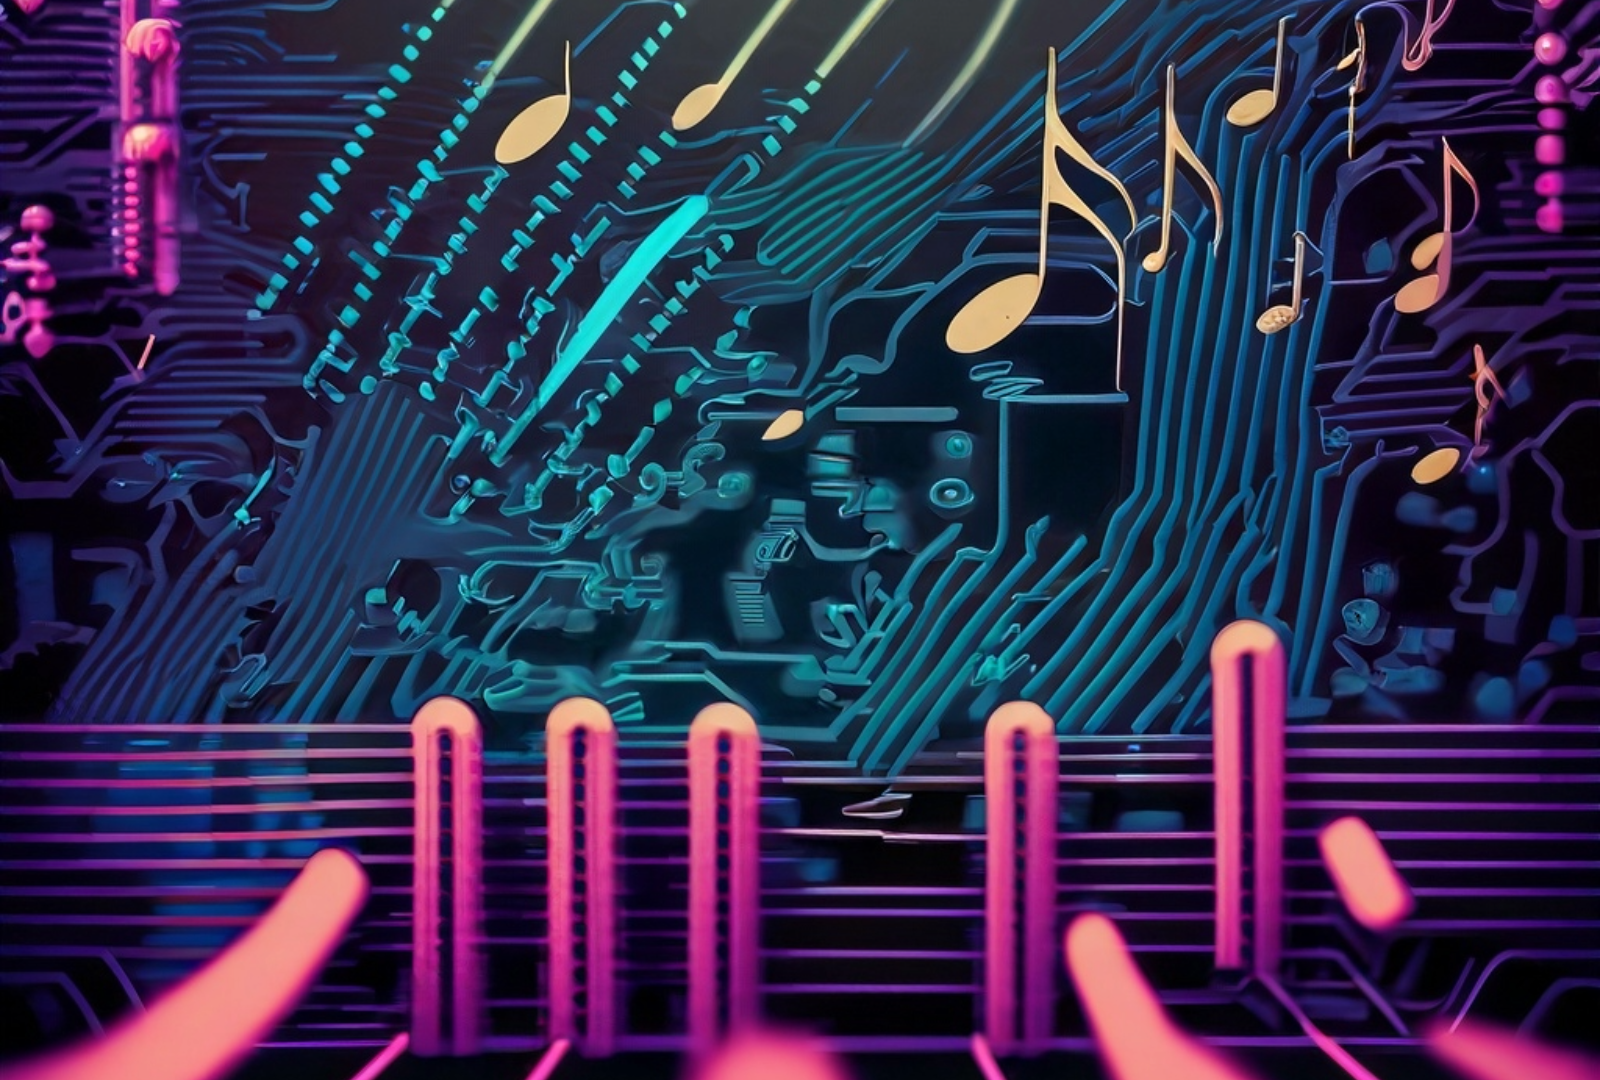 A neon-colored graphic of abstract piano keys with soundwaves, music notes, and digital lines.